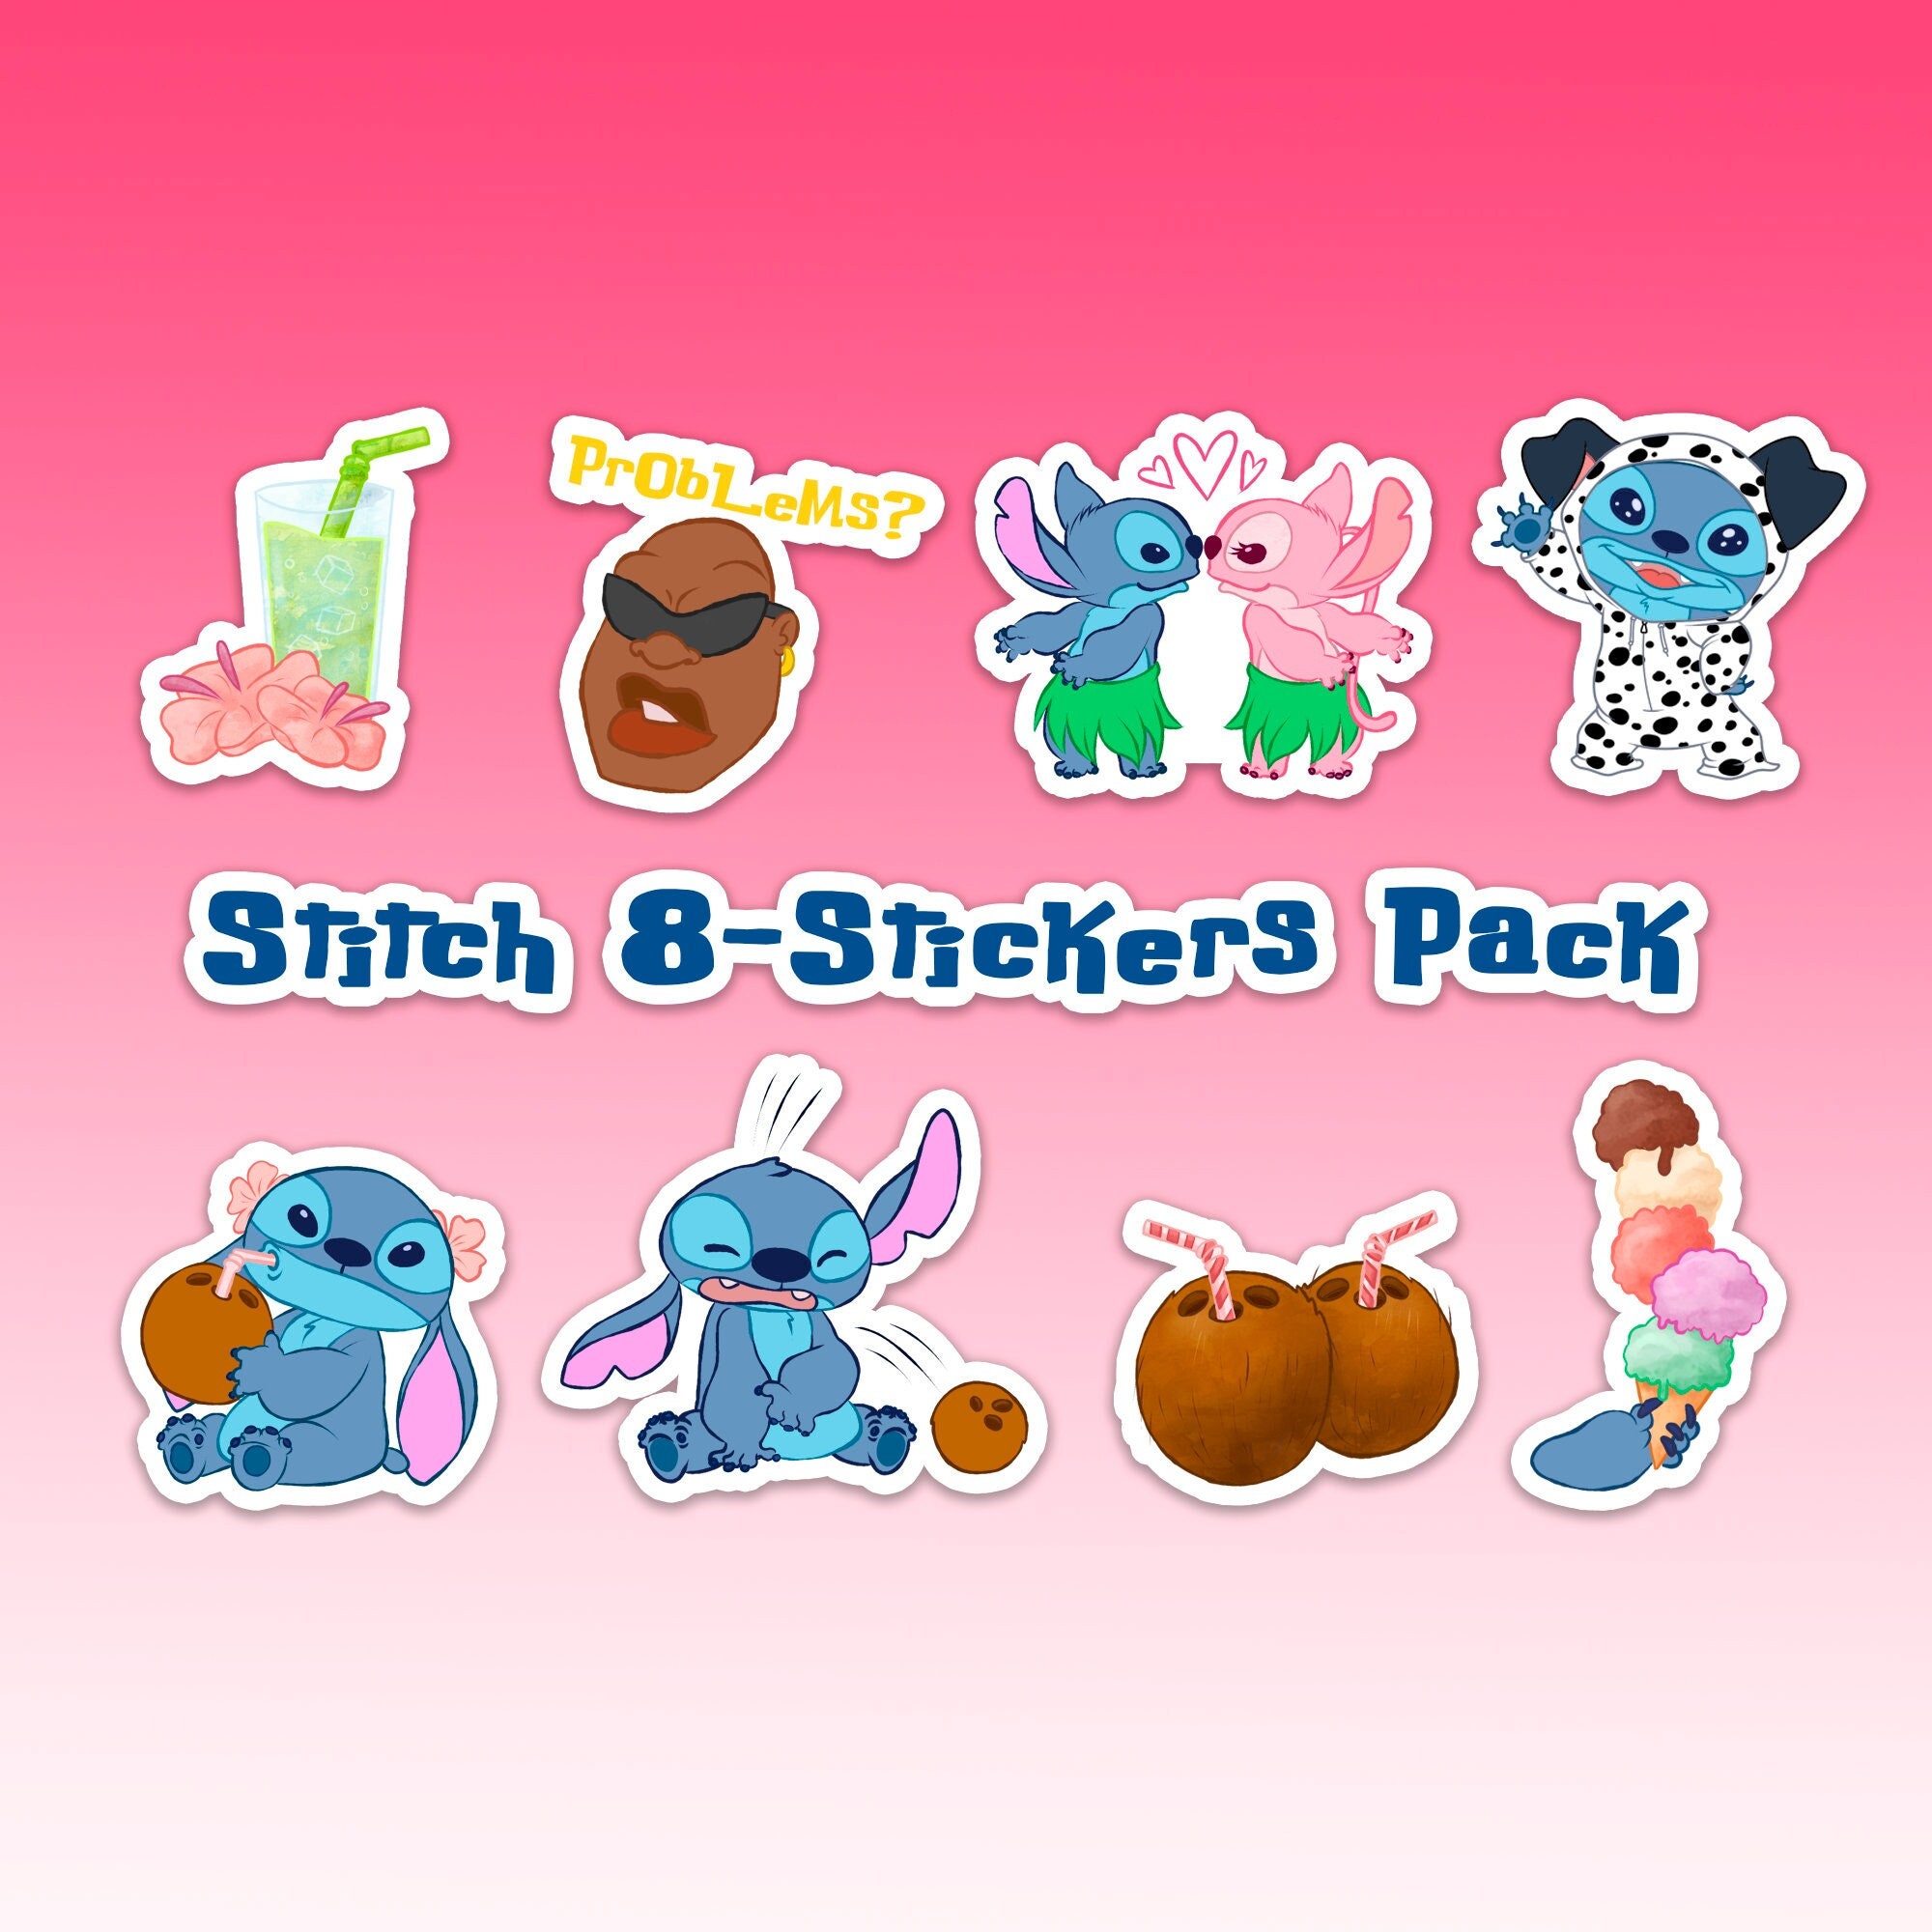 Lilo and Stitch Sticker Pack Disney Stickers for Laptops and Phone Cases  Disney Sticker Bundle 